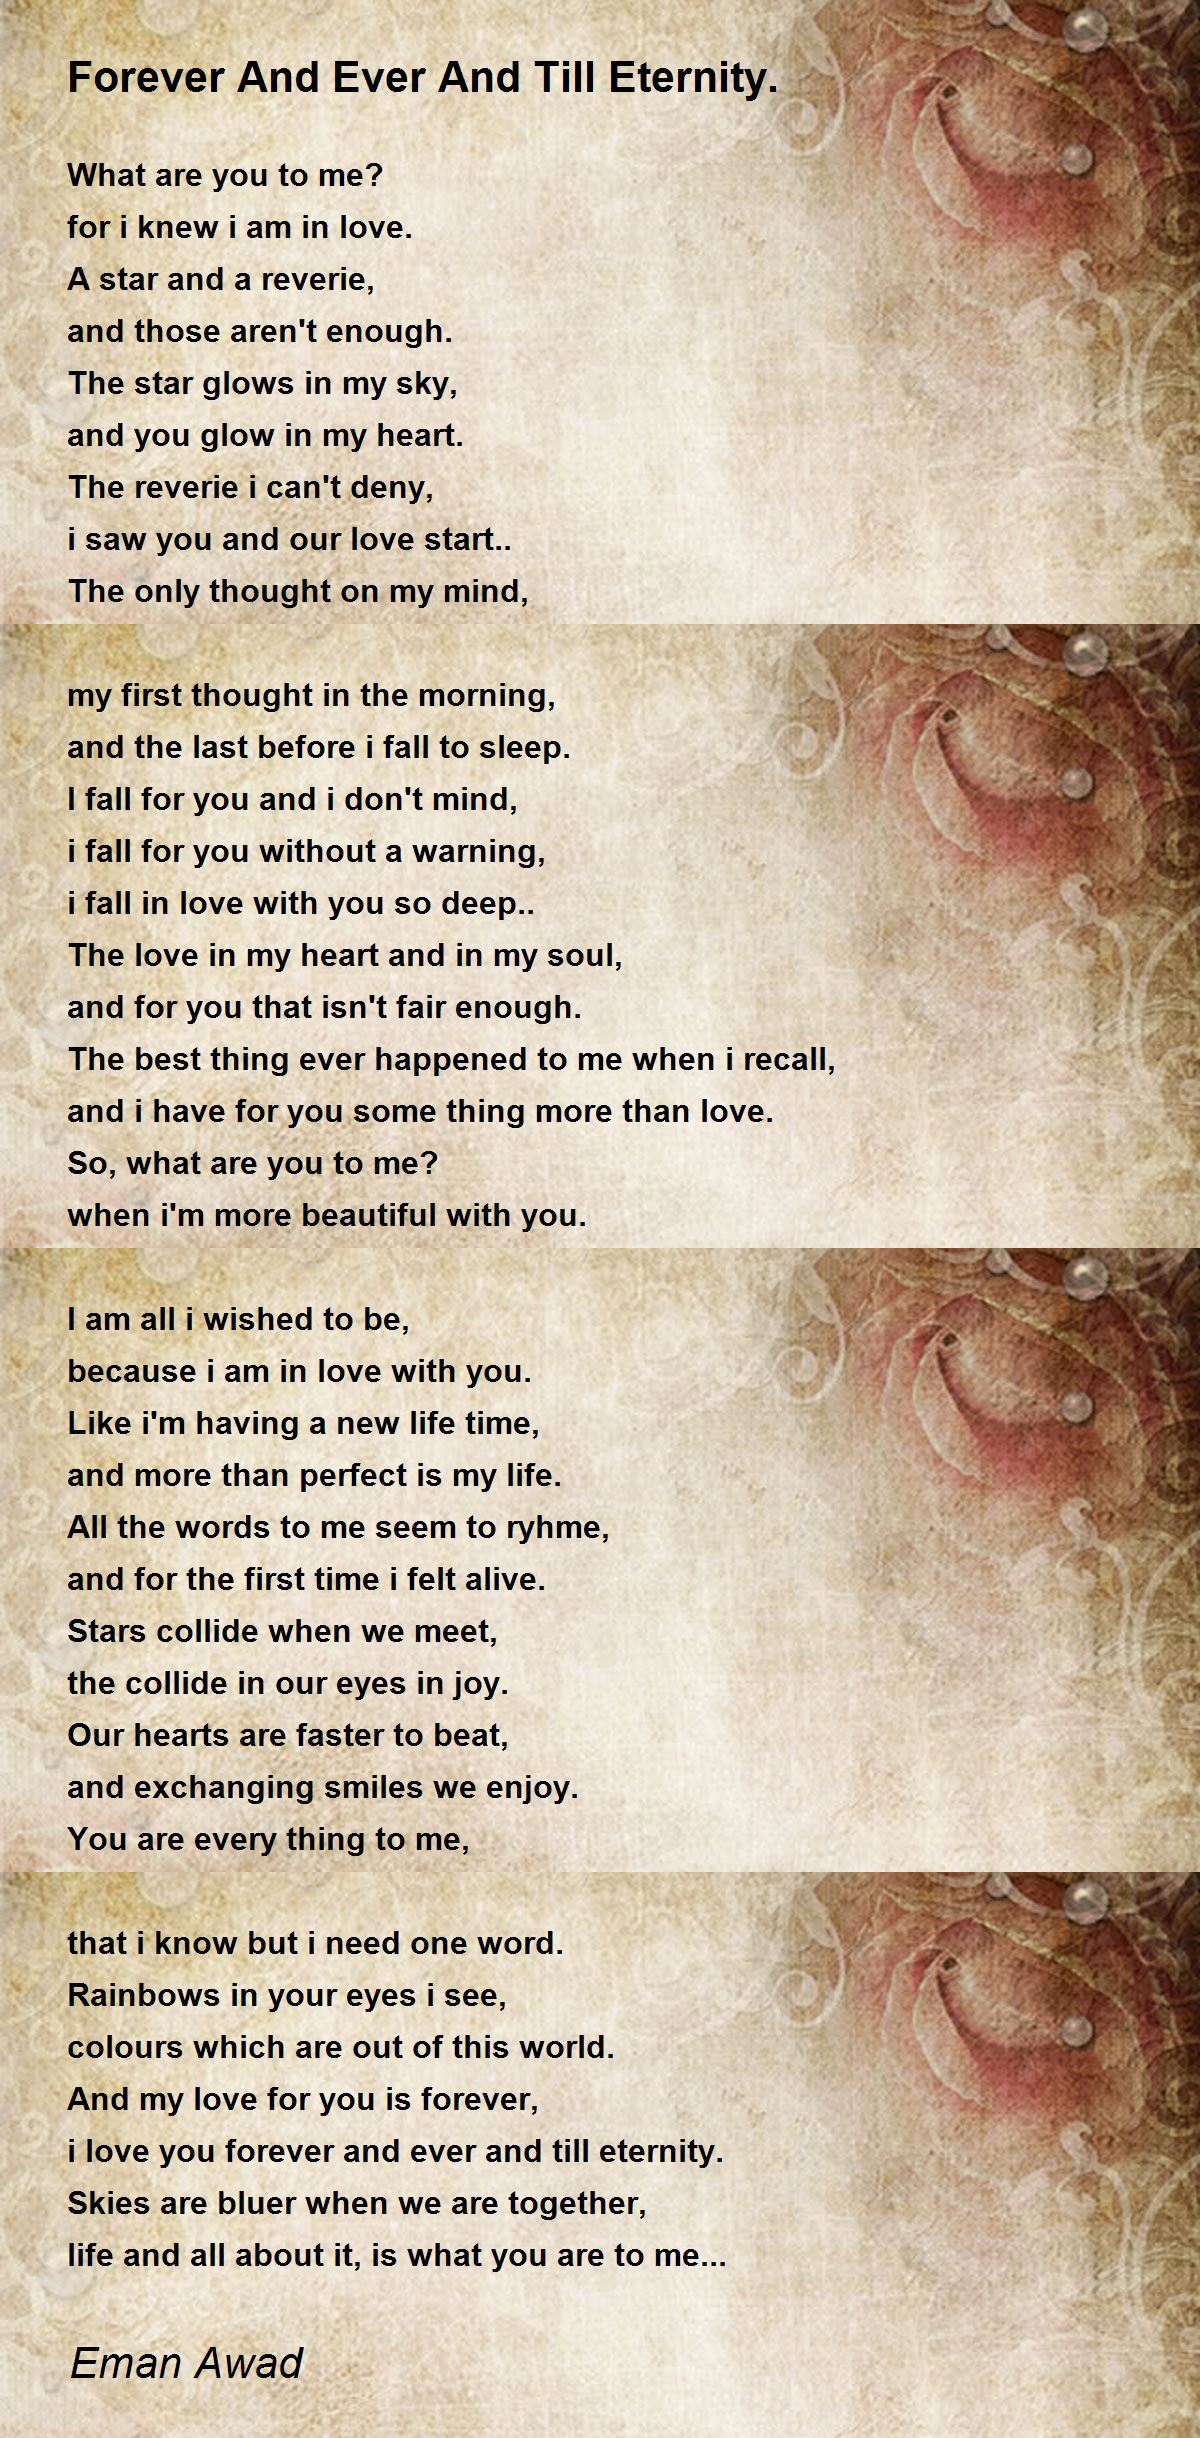 Forever And Ever And Till Eternity Poem By Eman Awad Poem Hunter